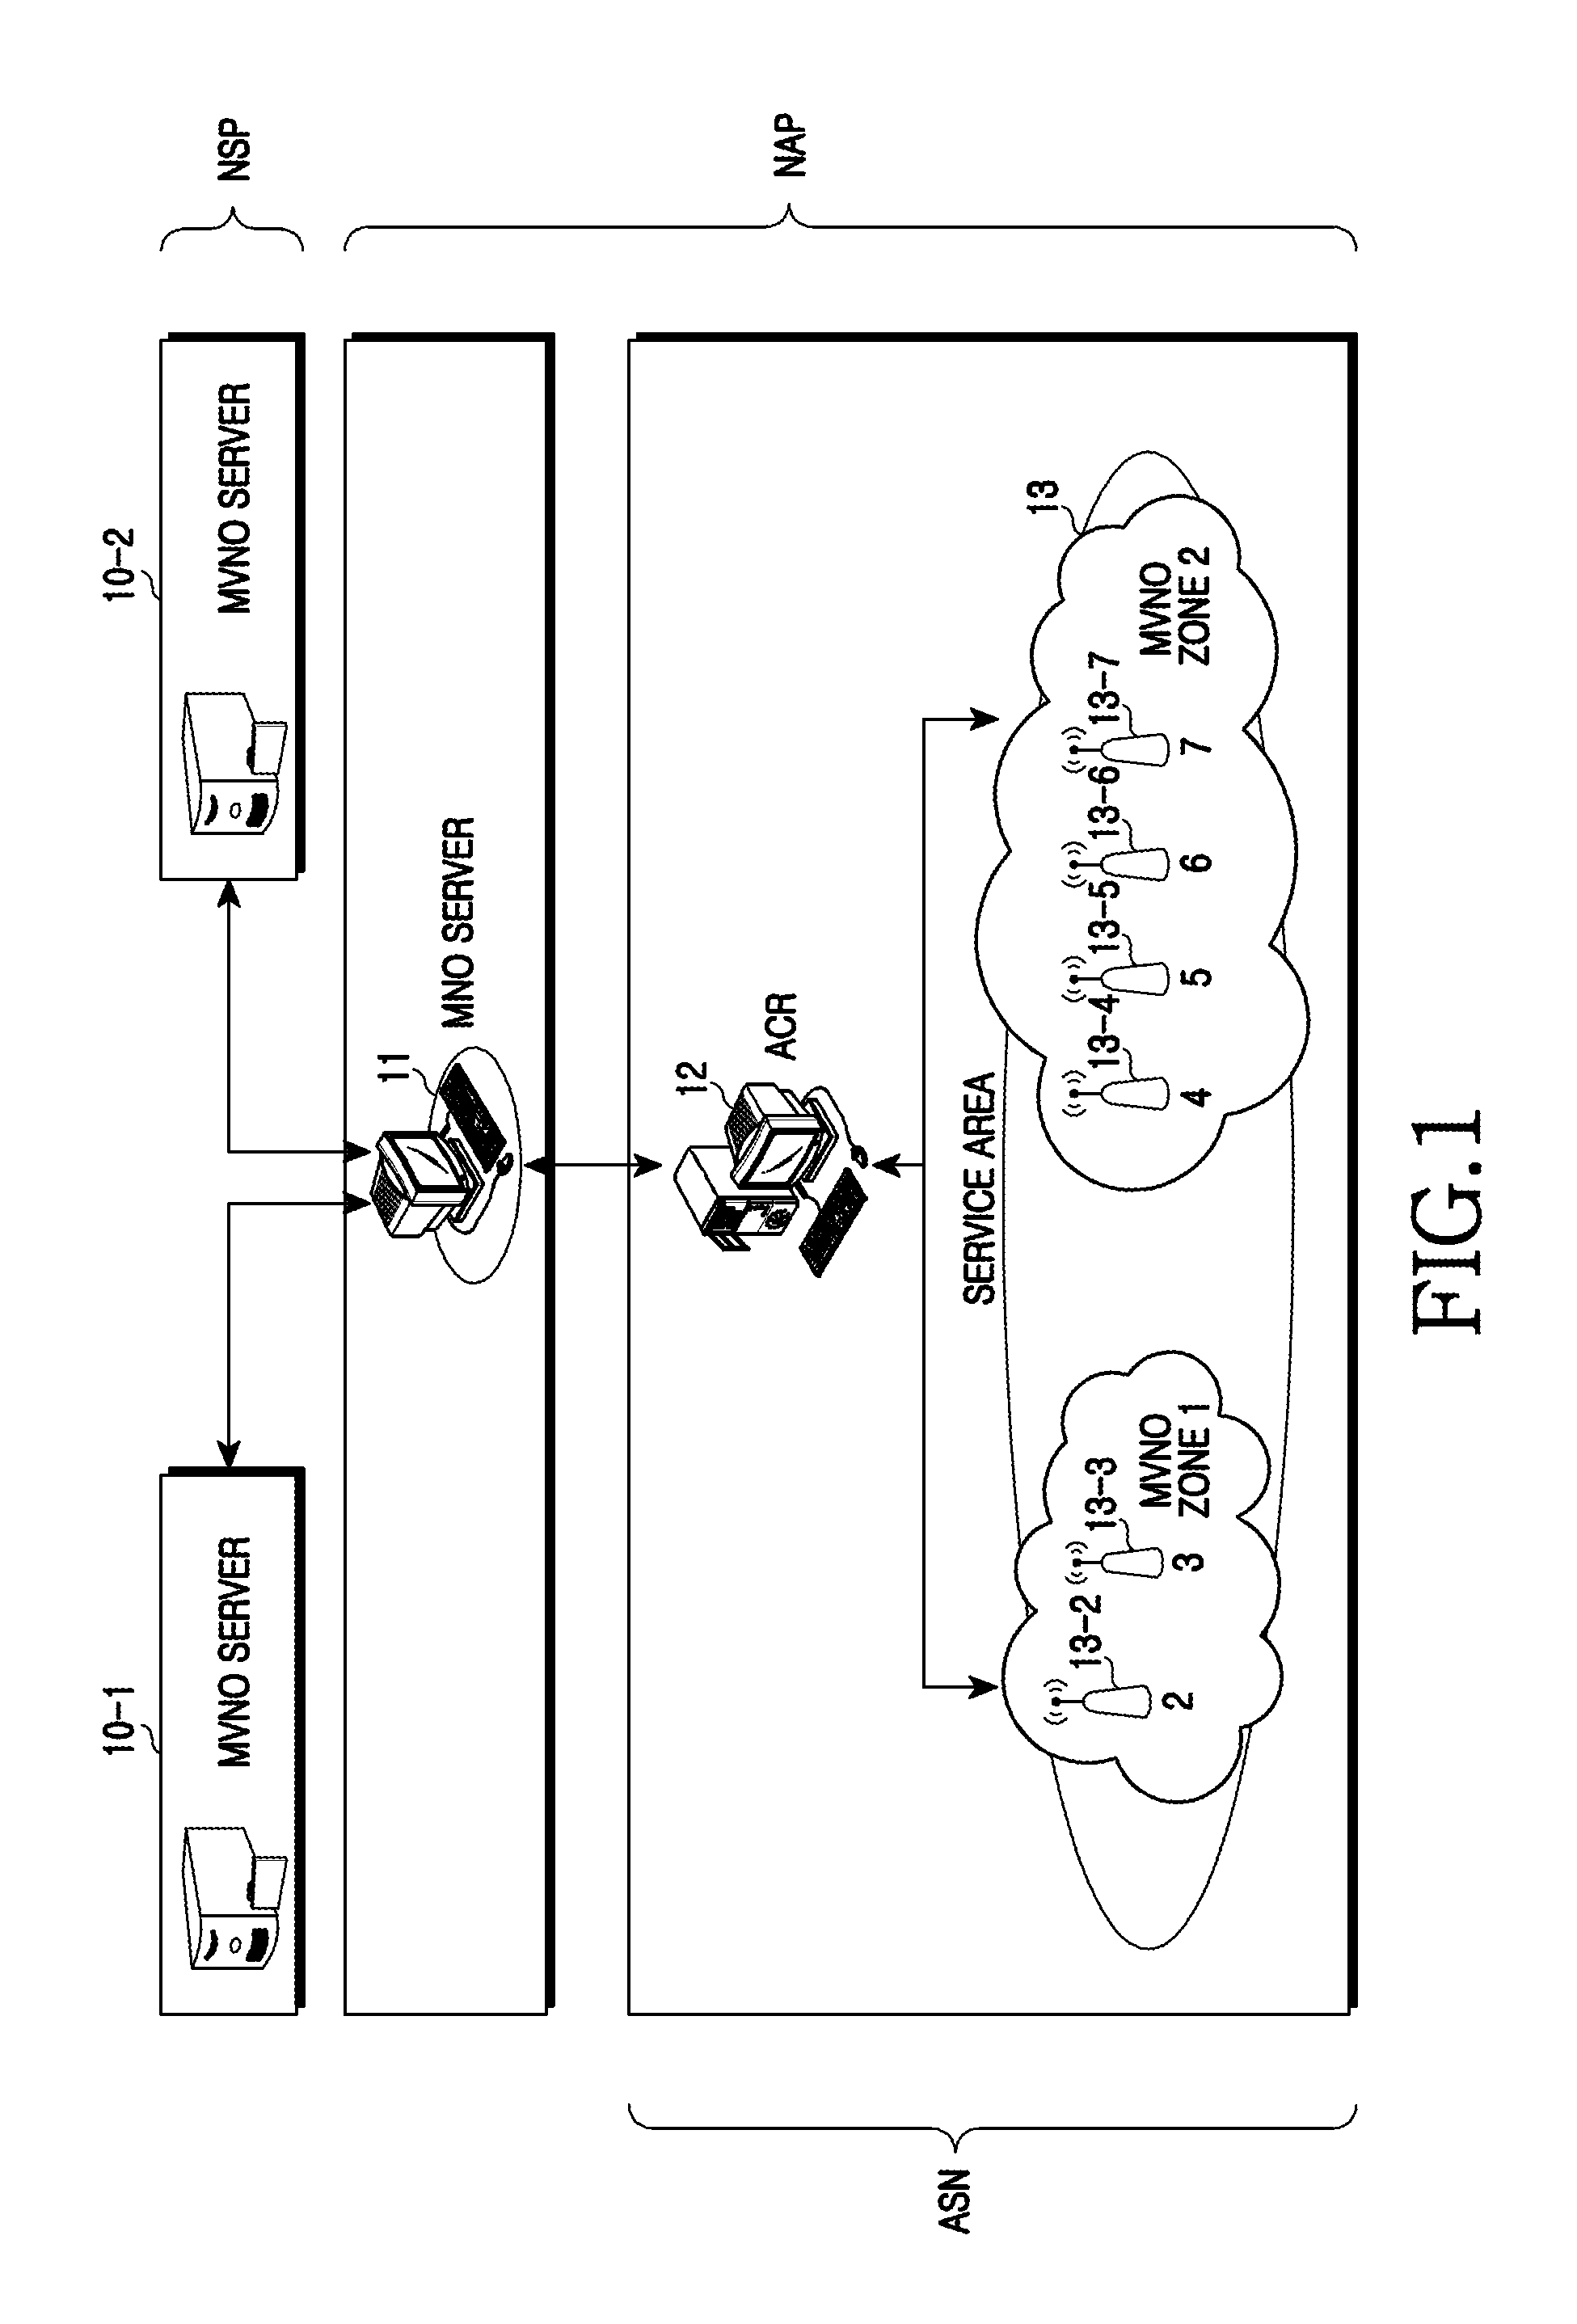 Apparatus and method for admission control considering multiple service providers in a broadband wireless communication system